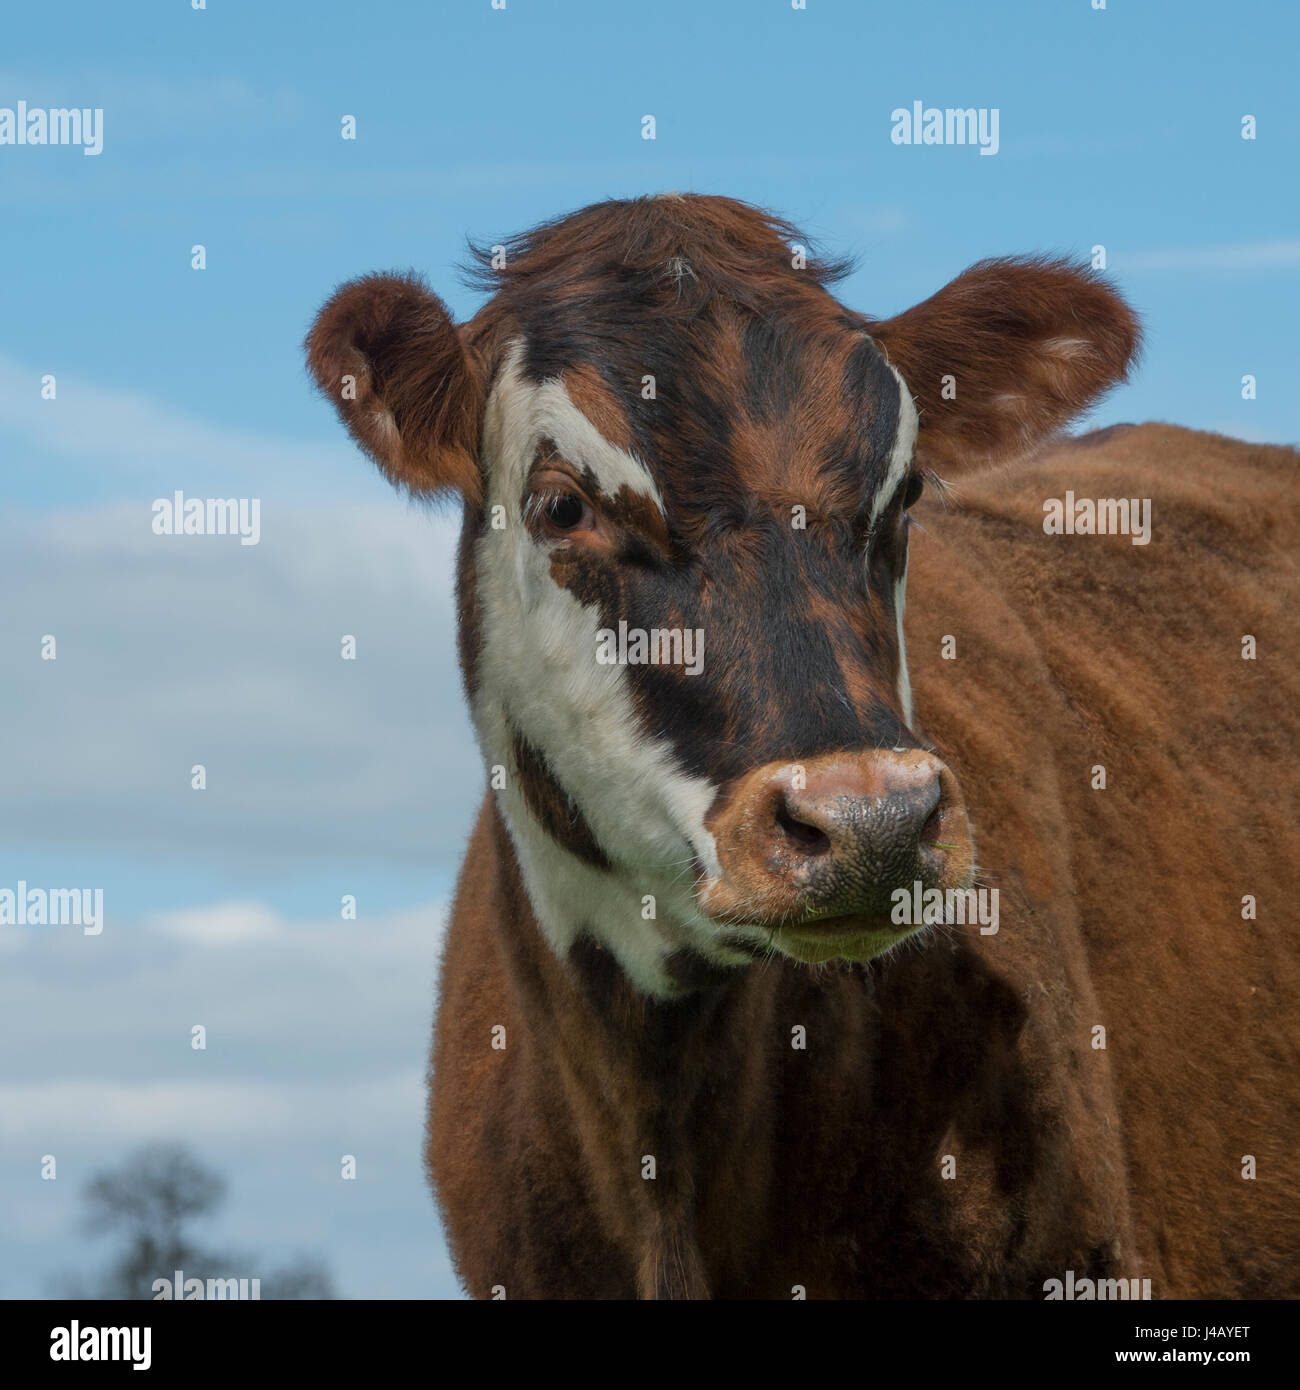 cow in field with blue sky Stock Photo